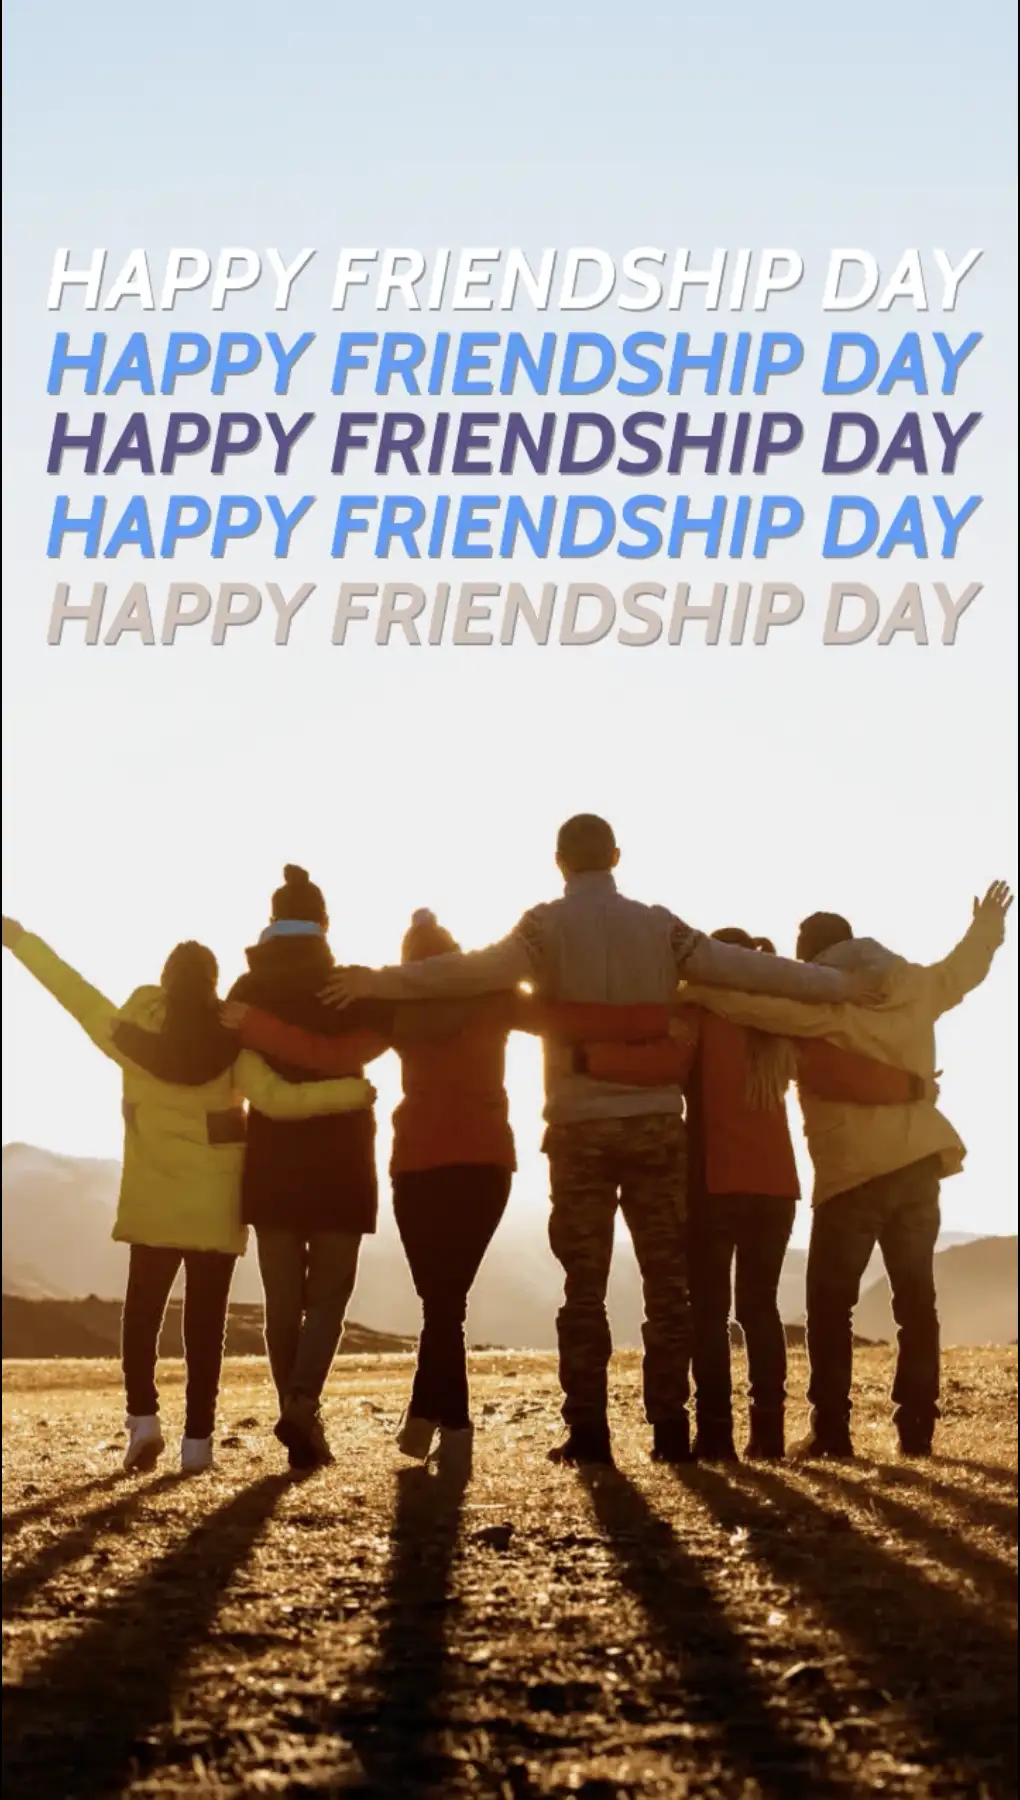 Simple_friendship_day_wishes